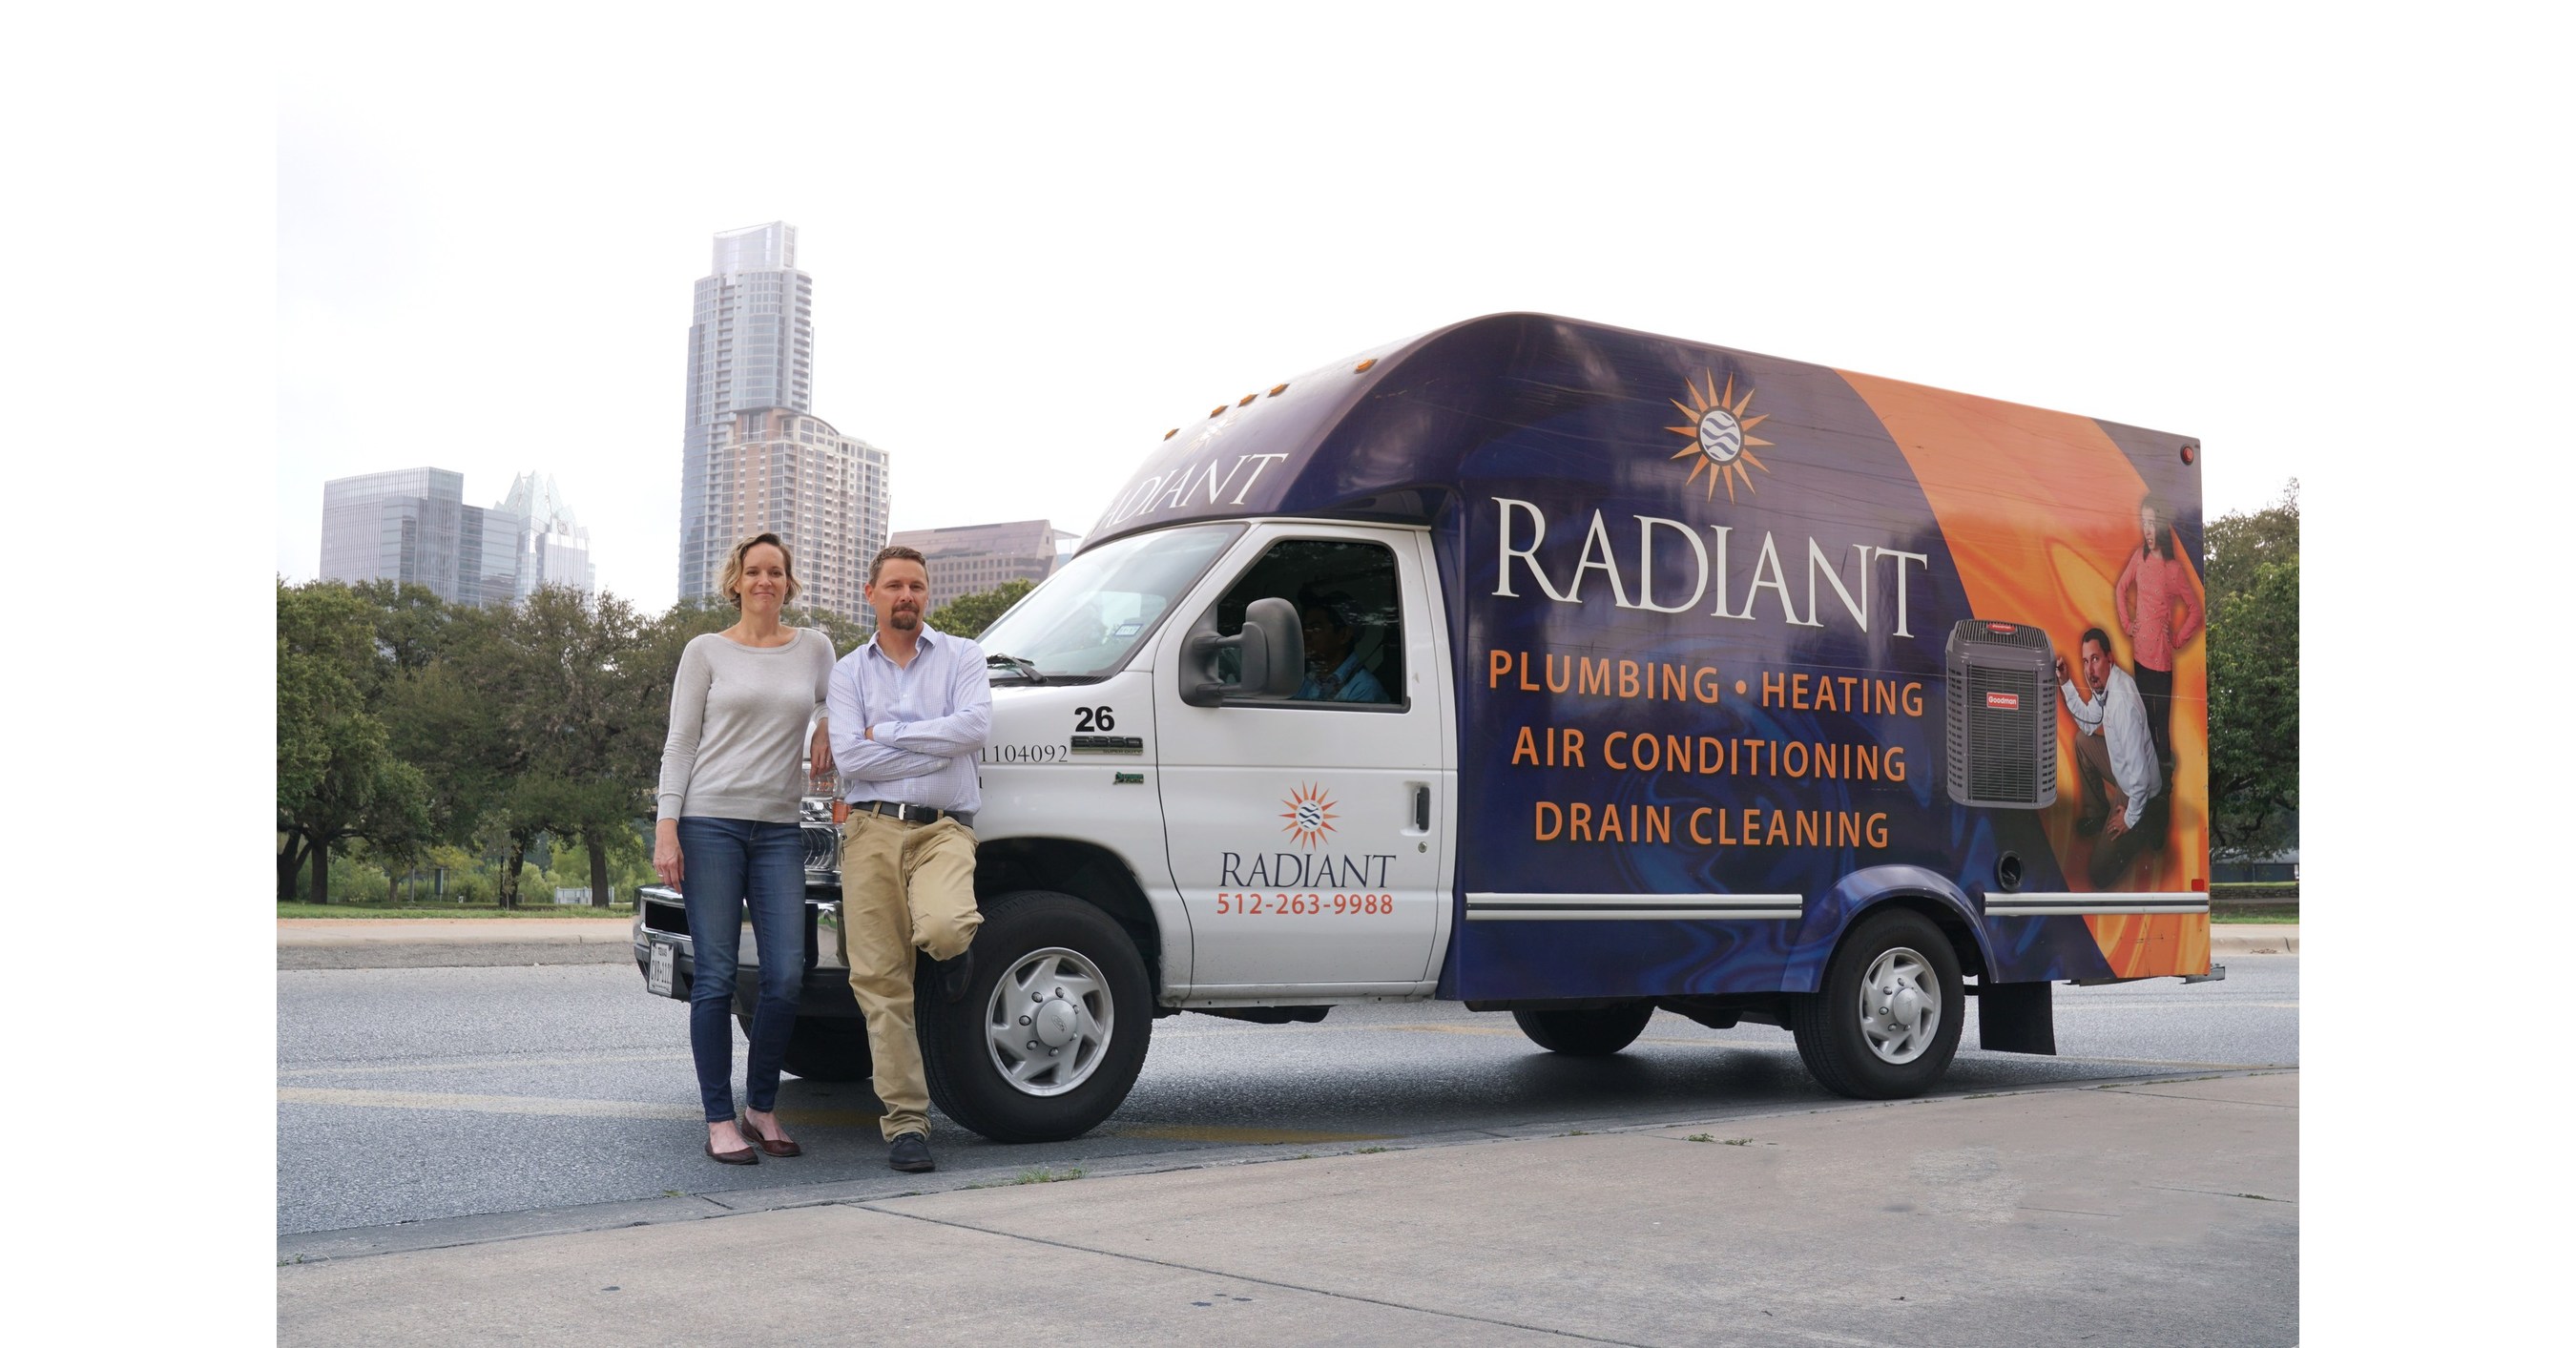 Radiant Plumbing and Air Conditioning suggests Austin residents add water conservation to list of New Year's resolutions - PRNewswire